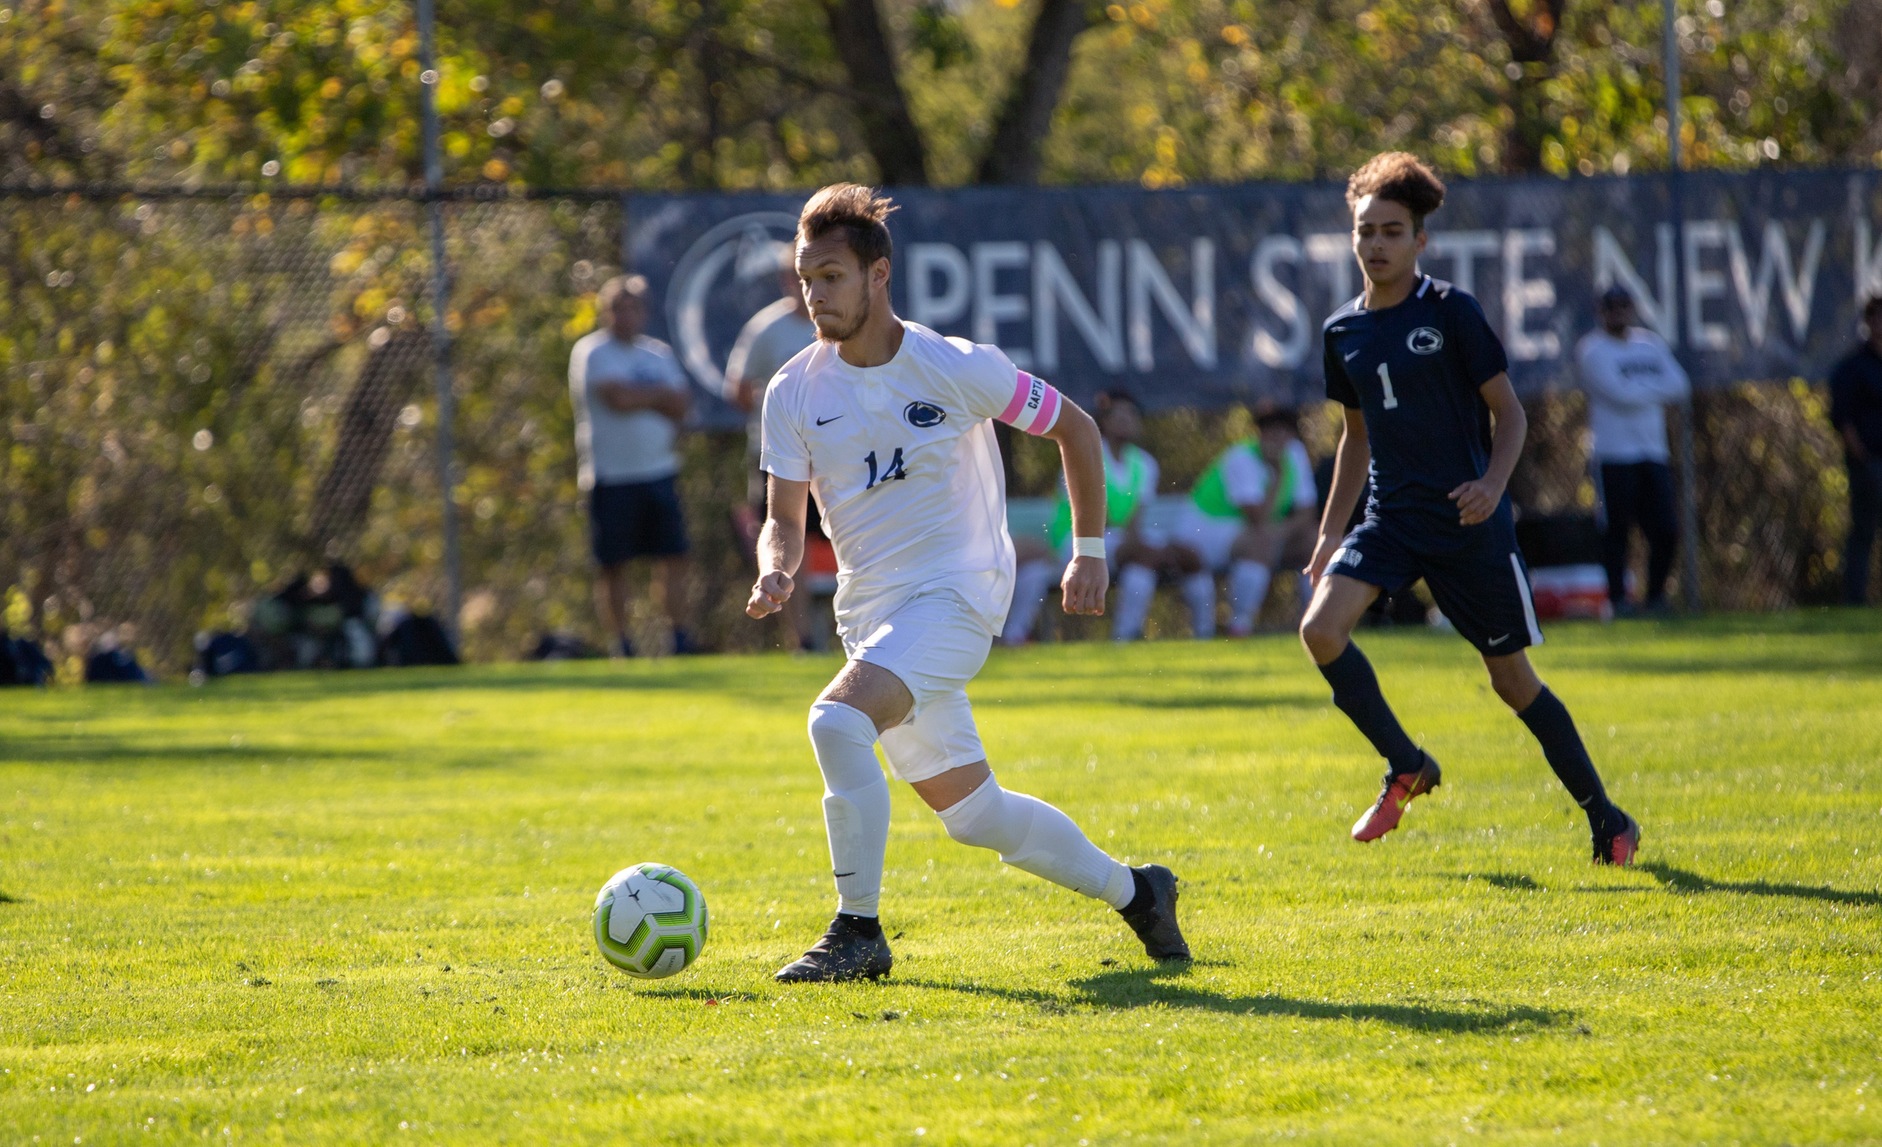 Men's Soccer Clinches Third Seed with Win over Lehigh Valley